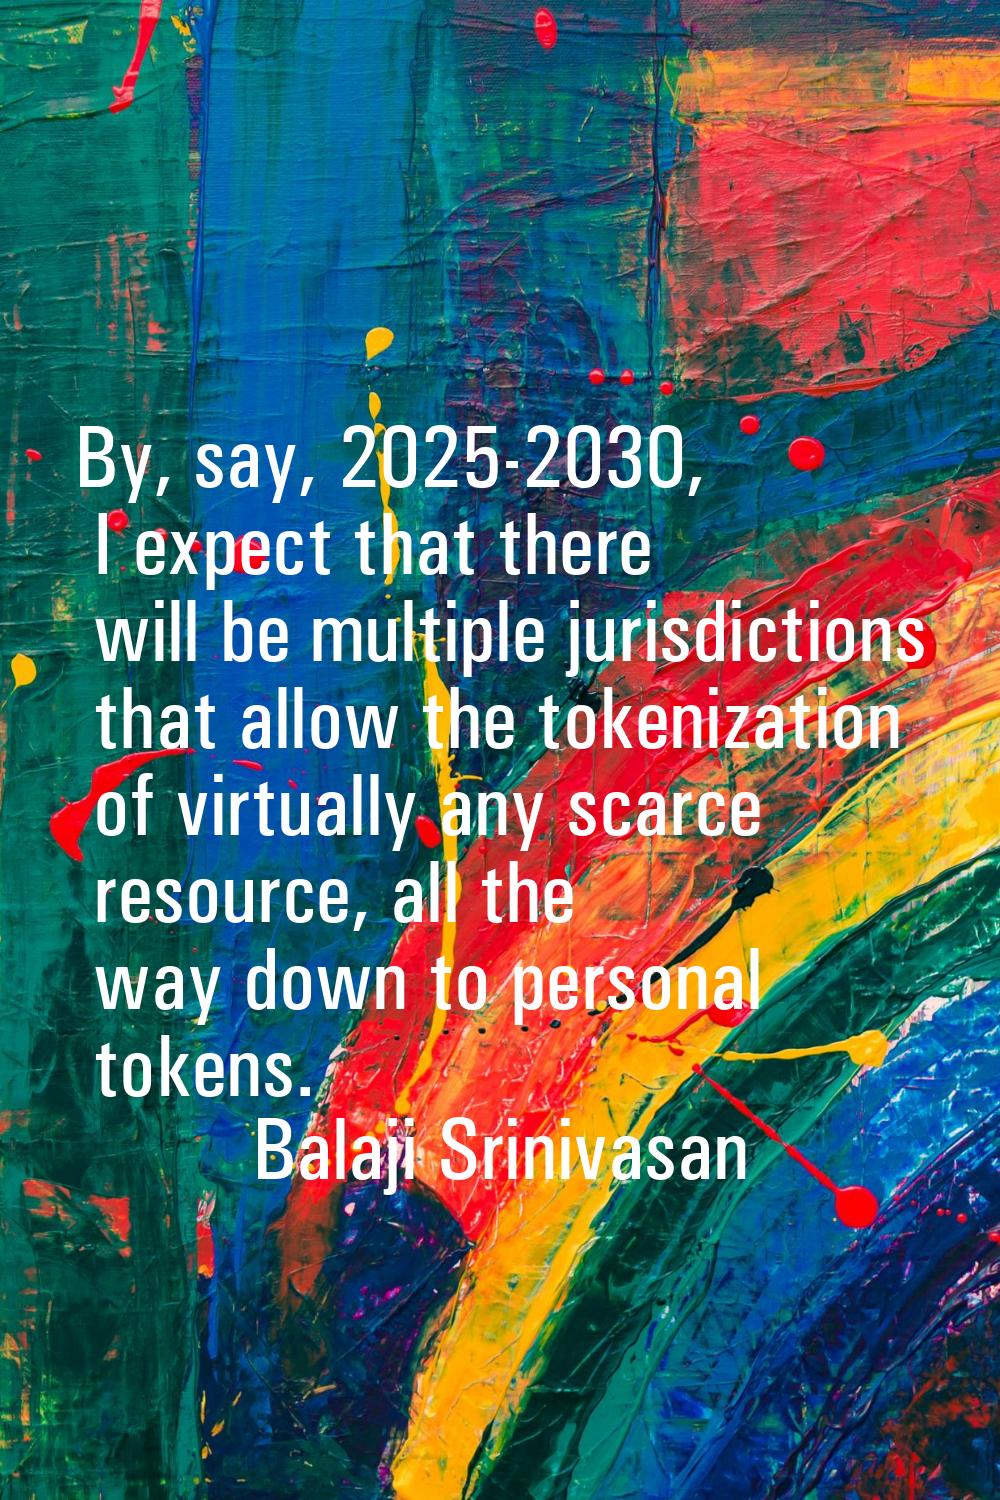 By, say, 2025-2030, I expect that there will be multiple jurisdictions that allow the tokenization 